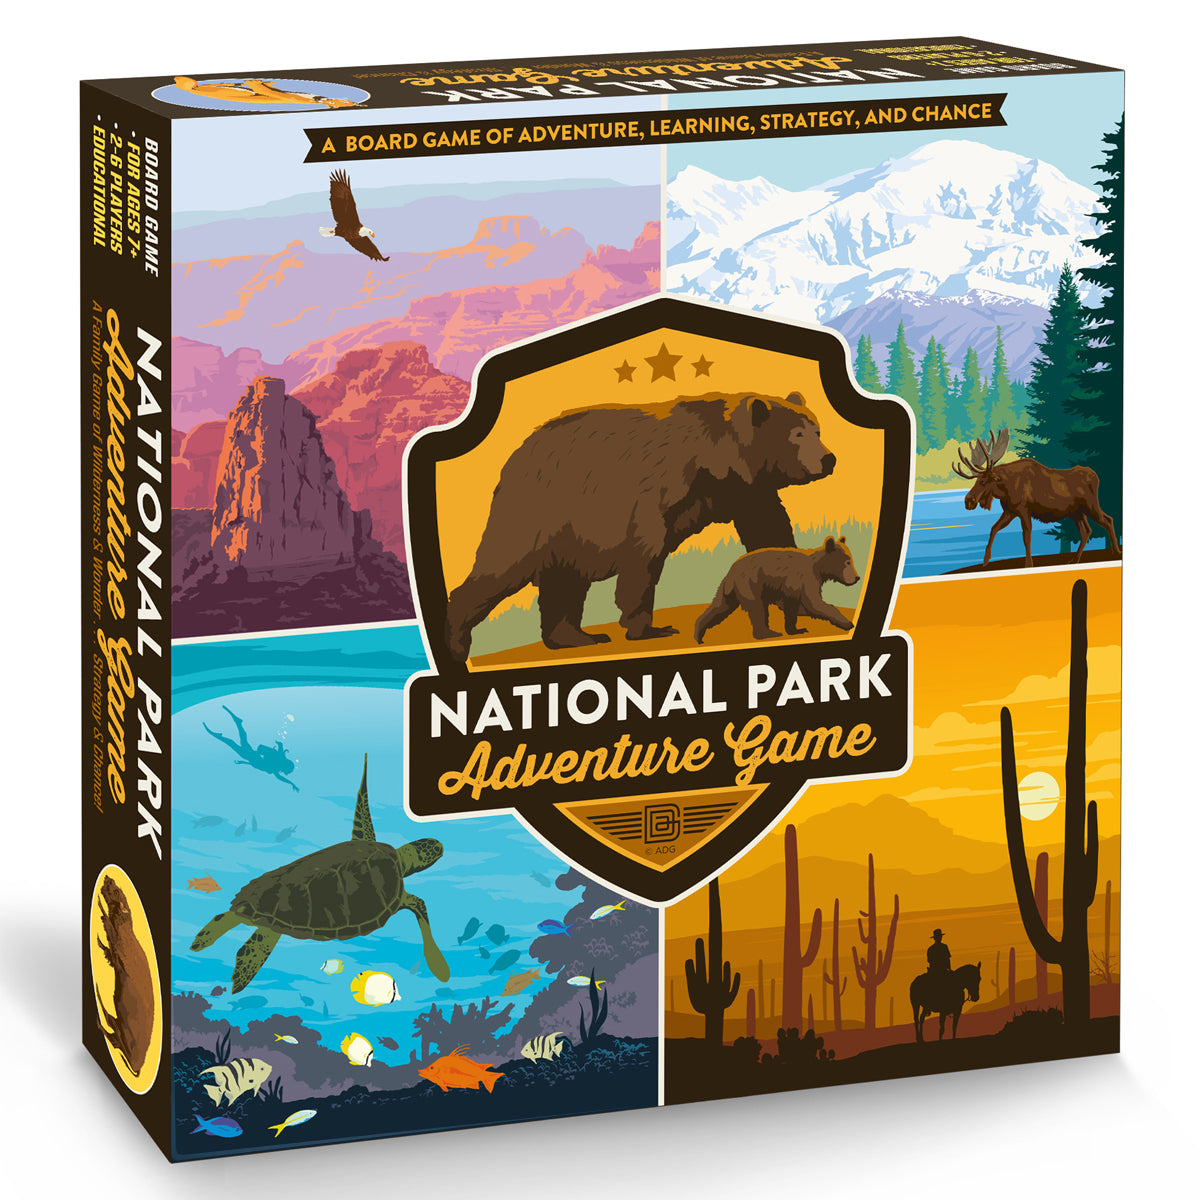 The National Park Adventure Board Game - ADG's Newest Release!